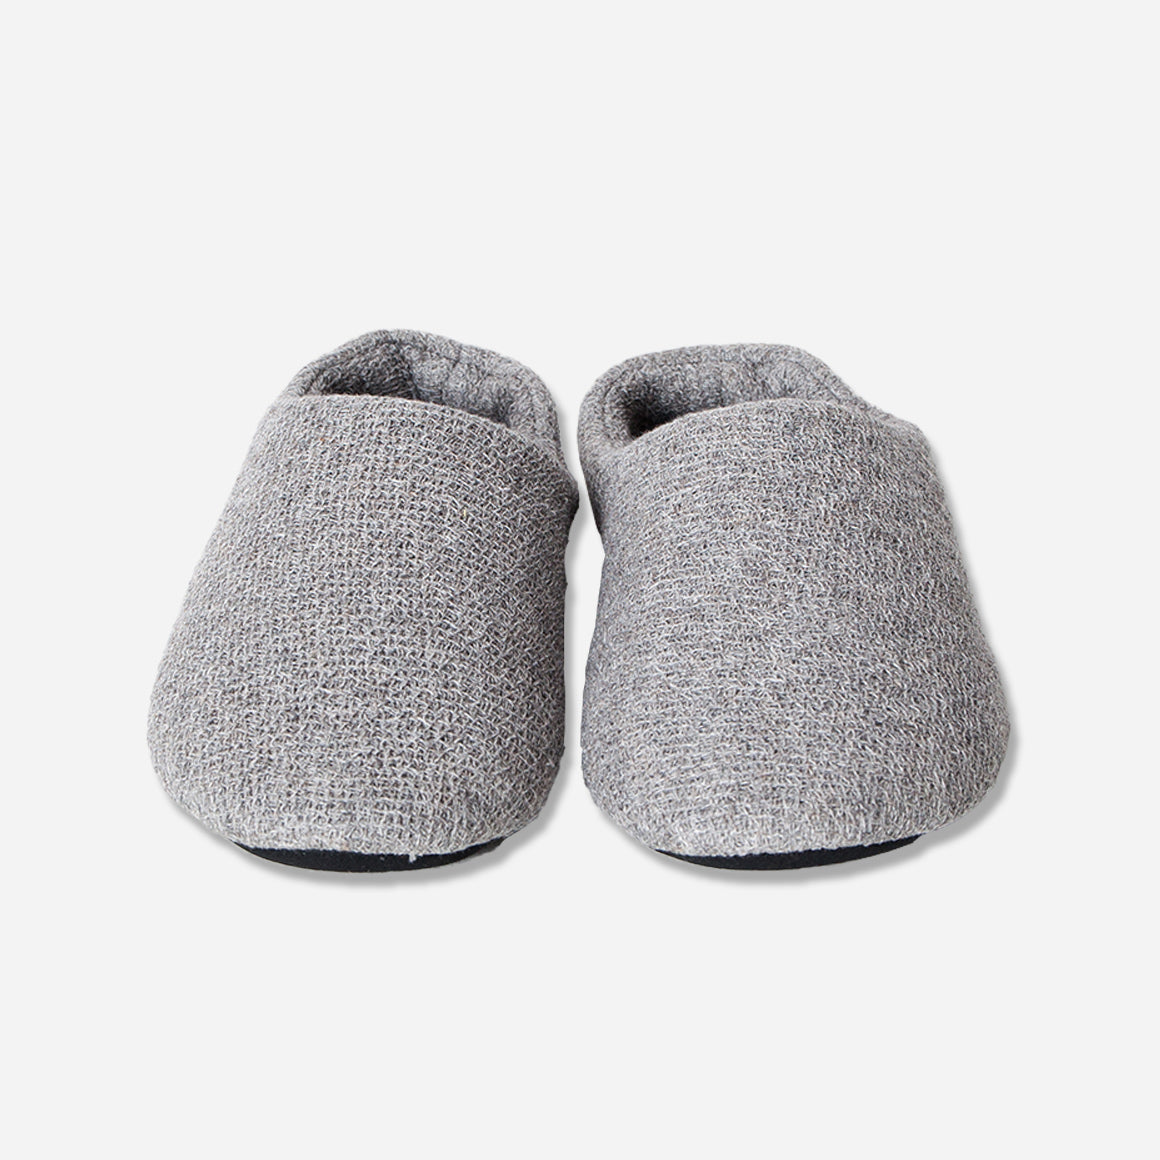 Front view of toe box of grey house slippers. Shot against white background.